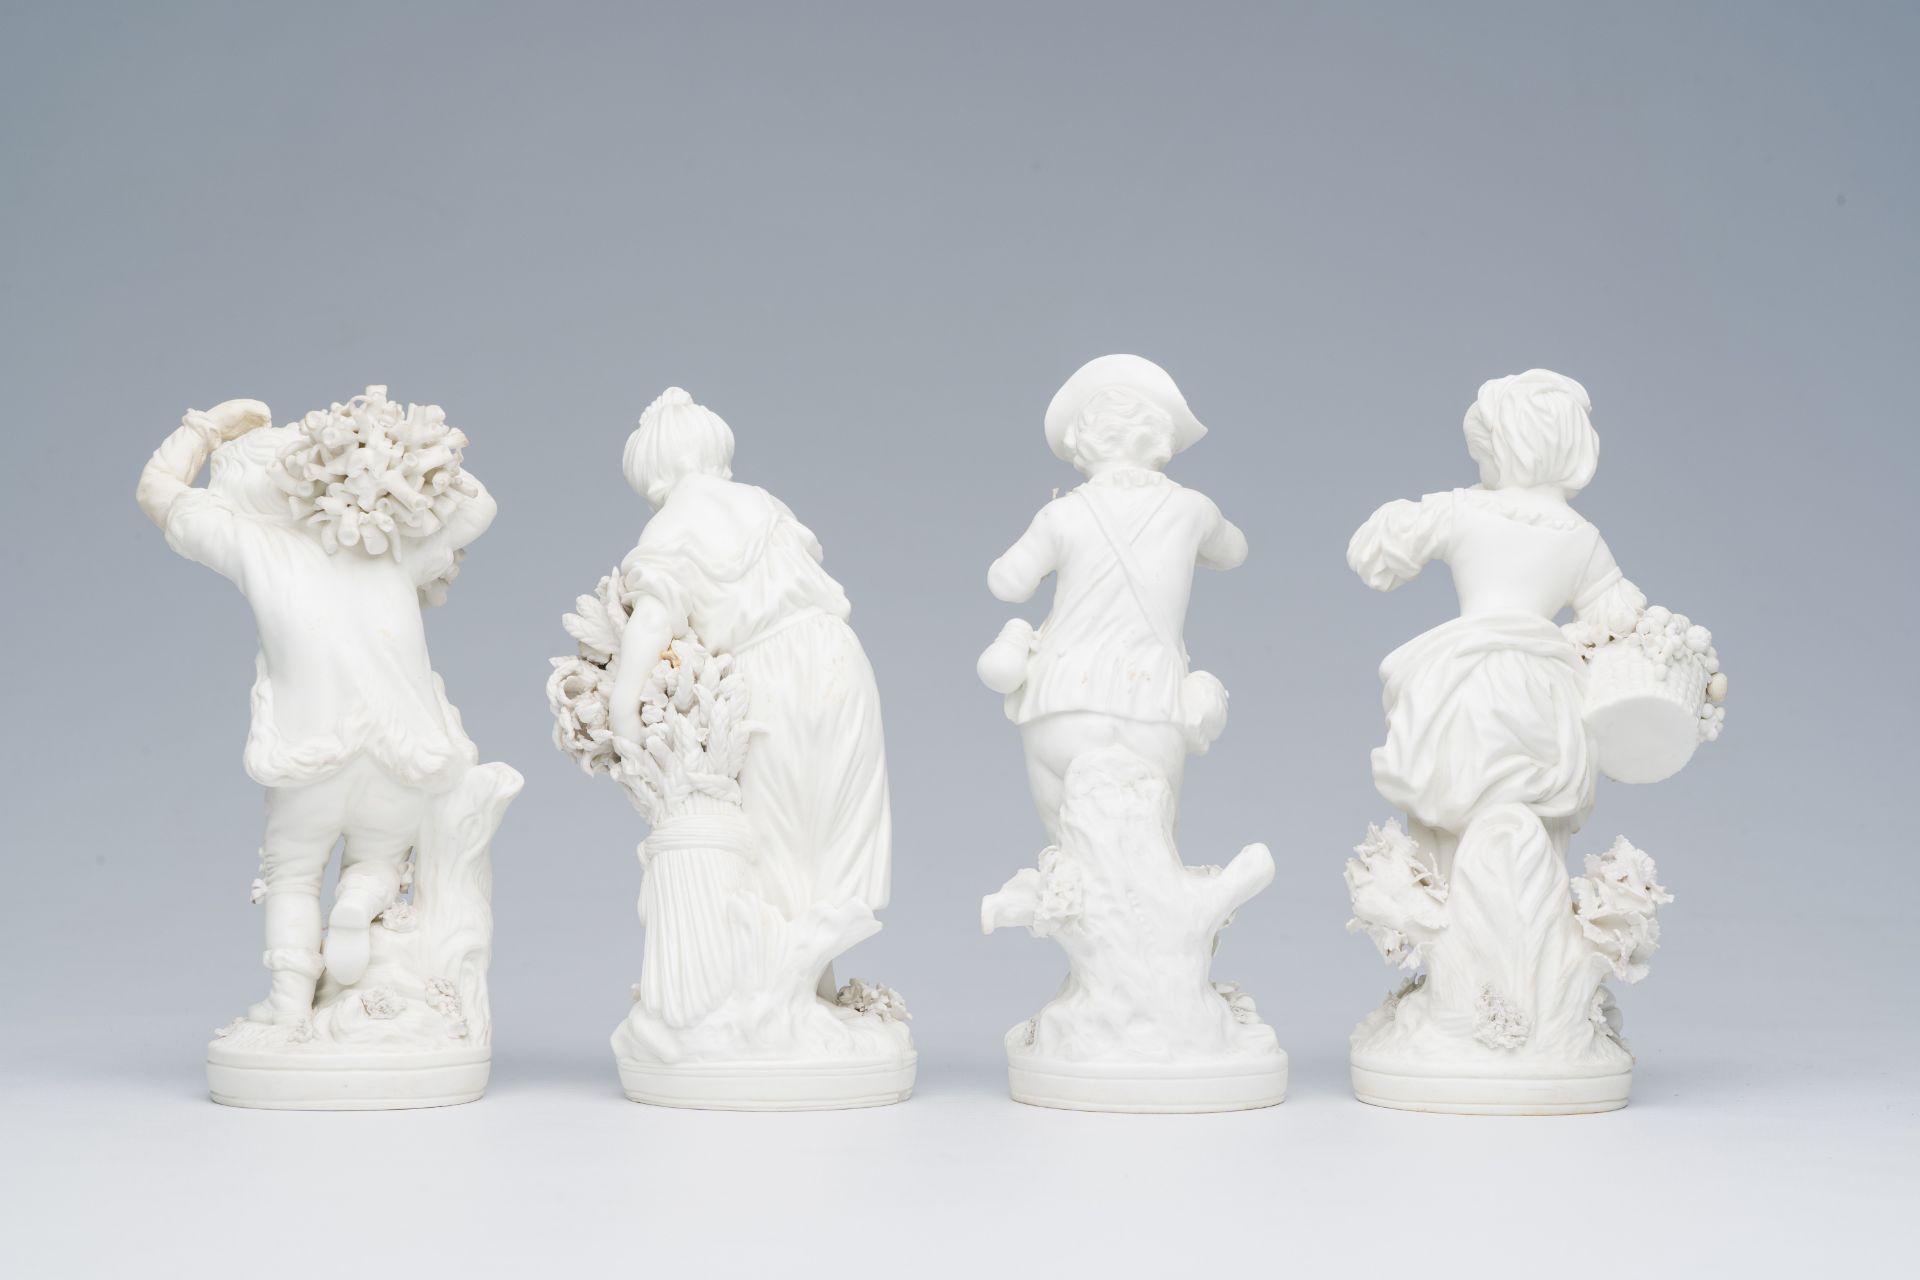 Four fine English biscuit figures depicting the 'four seasons', 19th C. - Image 4 of 7